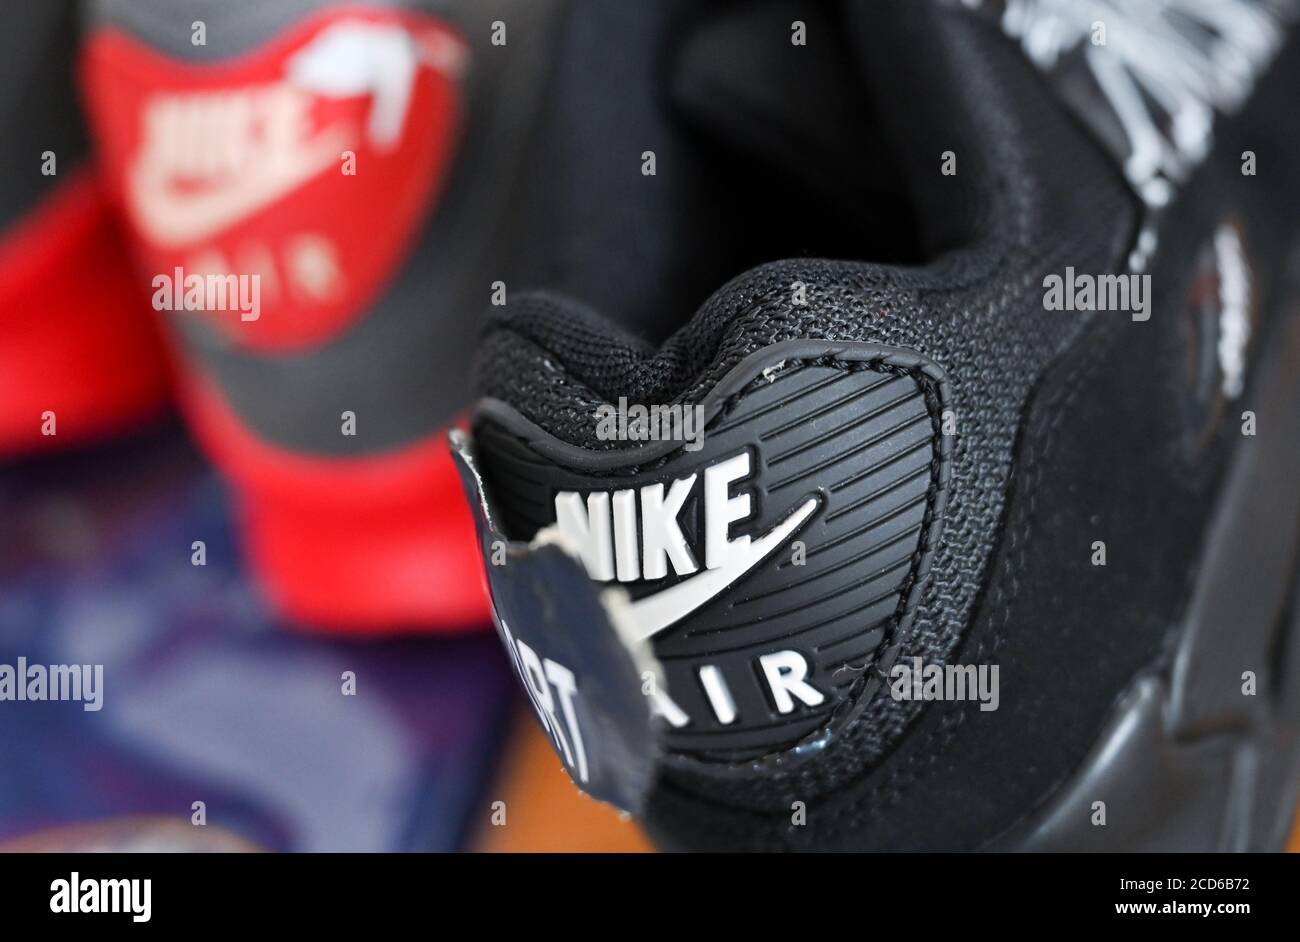 20 August 2020, Saxony, Schkeuditz: Counterfeit sports shoes from Nike can  be found on a table in the customs office at Leipzig Airport.  Counterfeiters sewed a patch over the Nike logo on